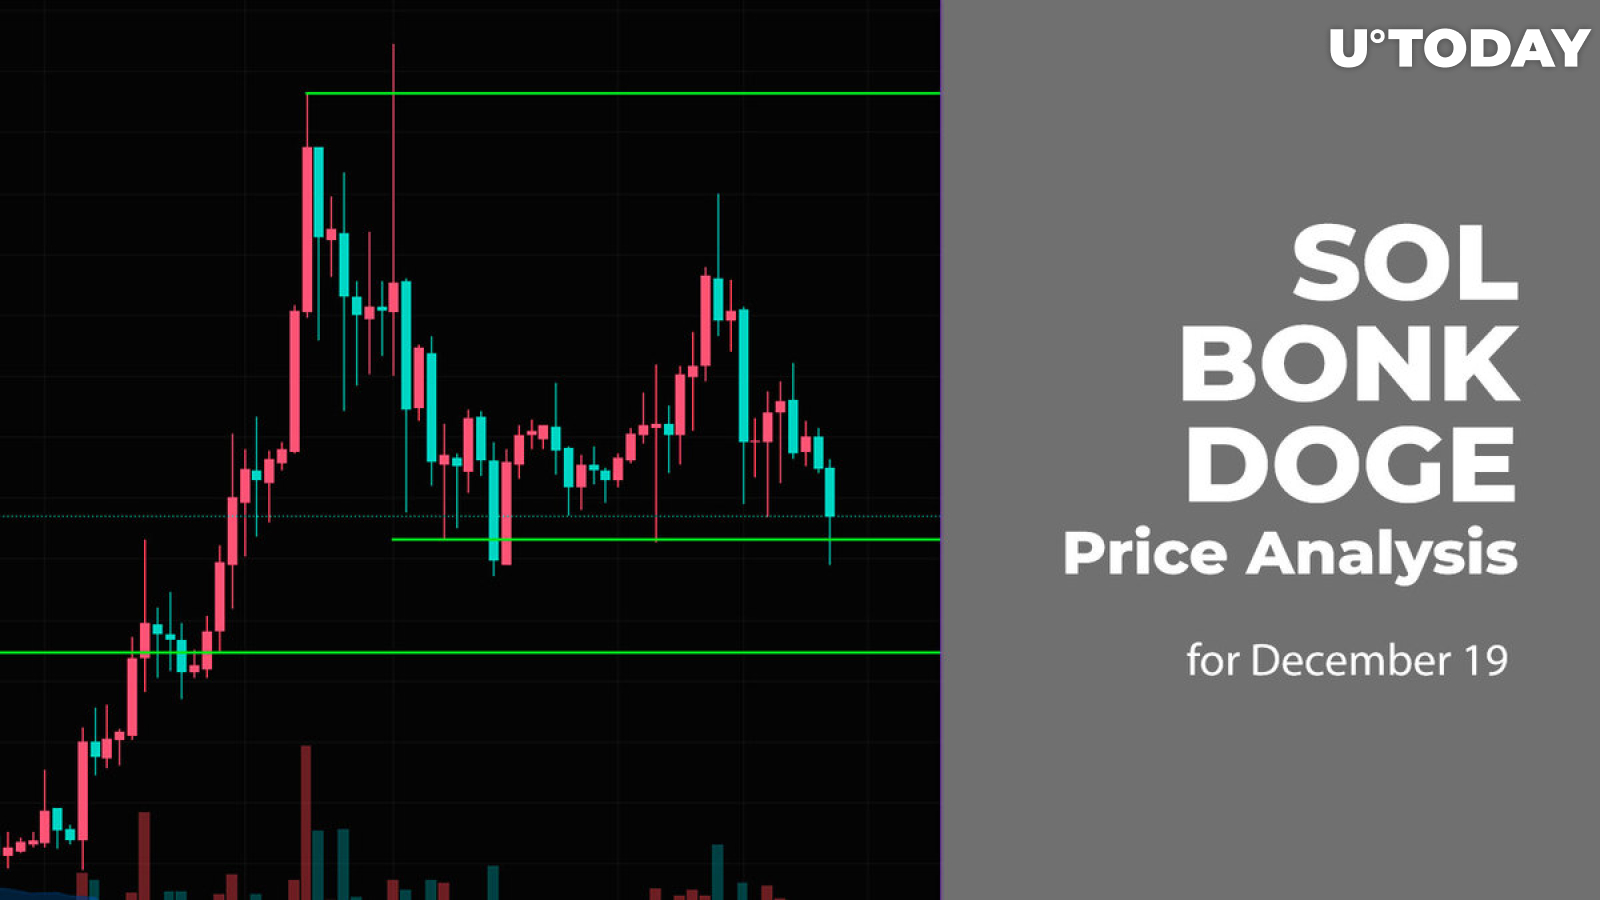 SOL, BONK and DOGE Price Analysis for December 19